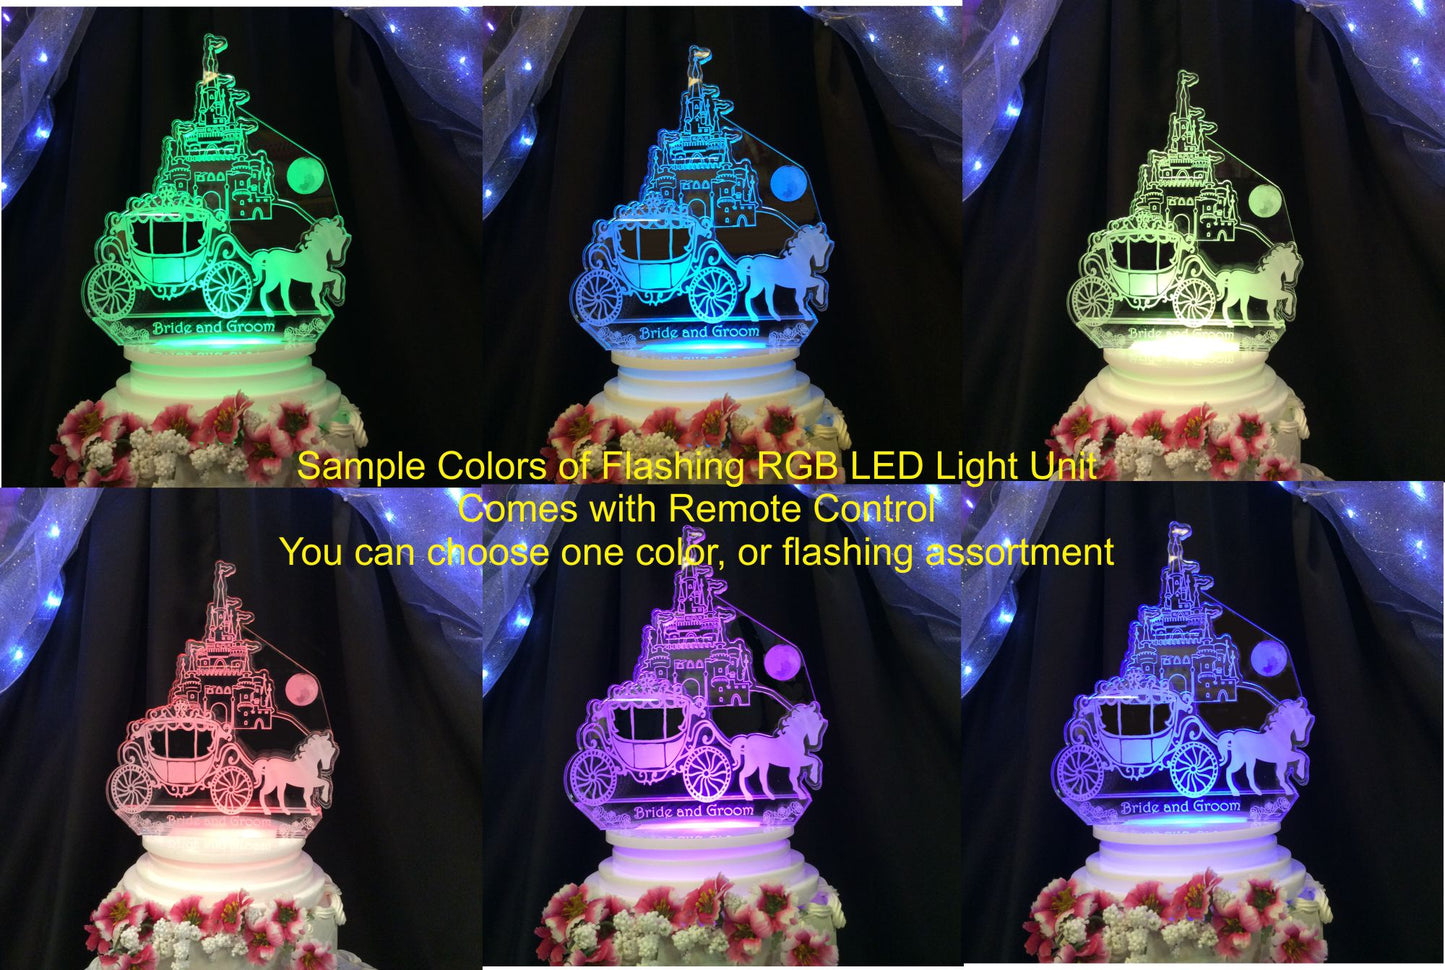 acrylic castle and carriage cake topper lit up with bride and groom name, shown in a variety of RGB colored LED lighting